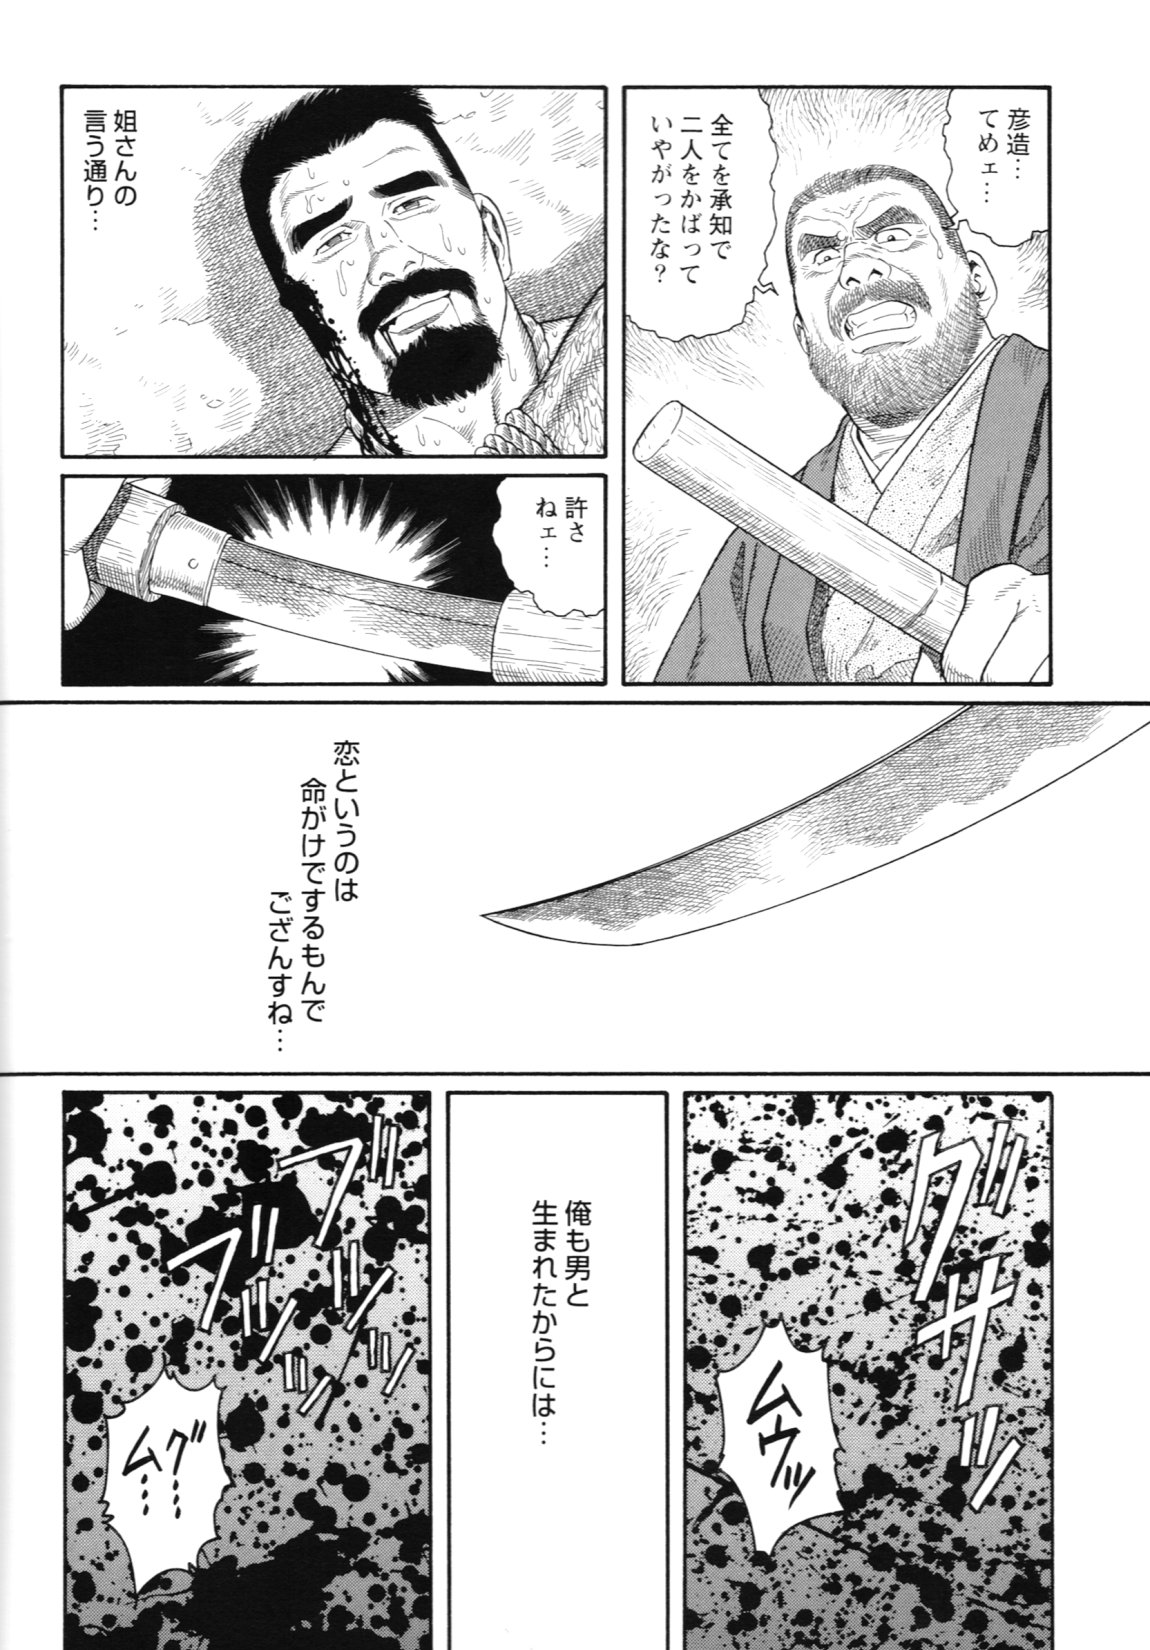 [Tagame] The Yakuzas Brave Blood page 14 full